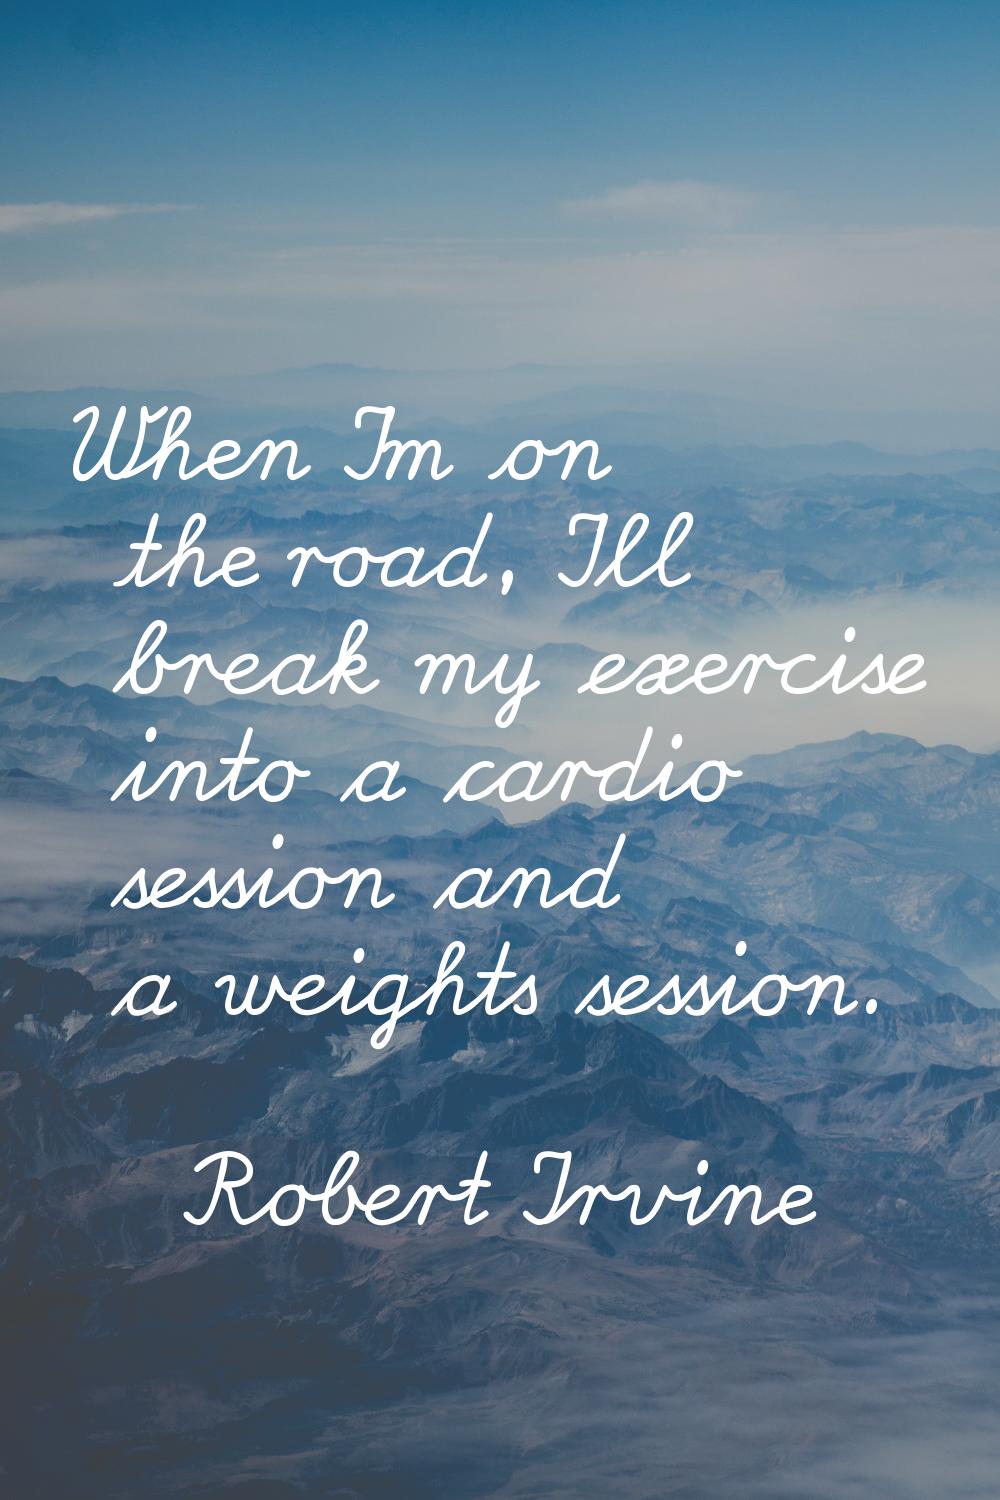 When I'm on the road, I'll break my exercise into a cardio session and a weights session.